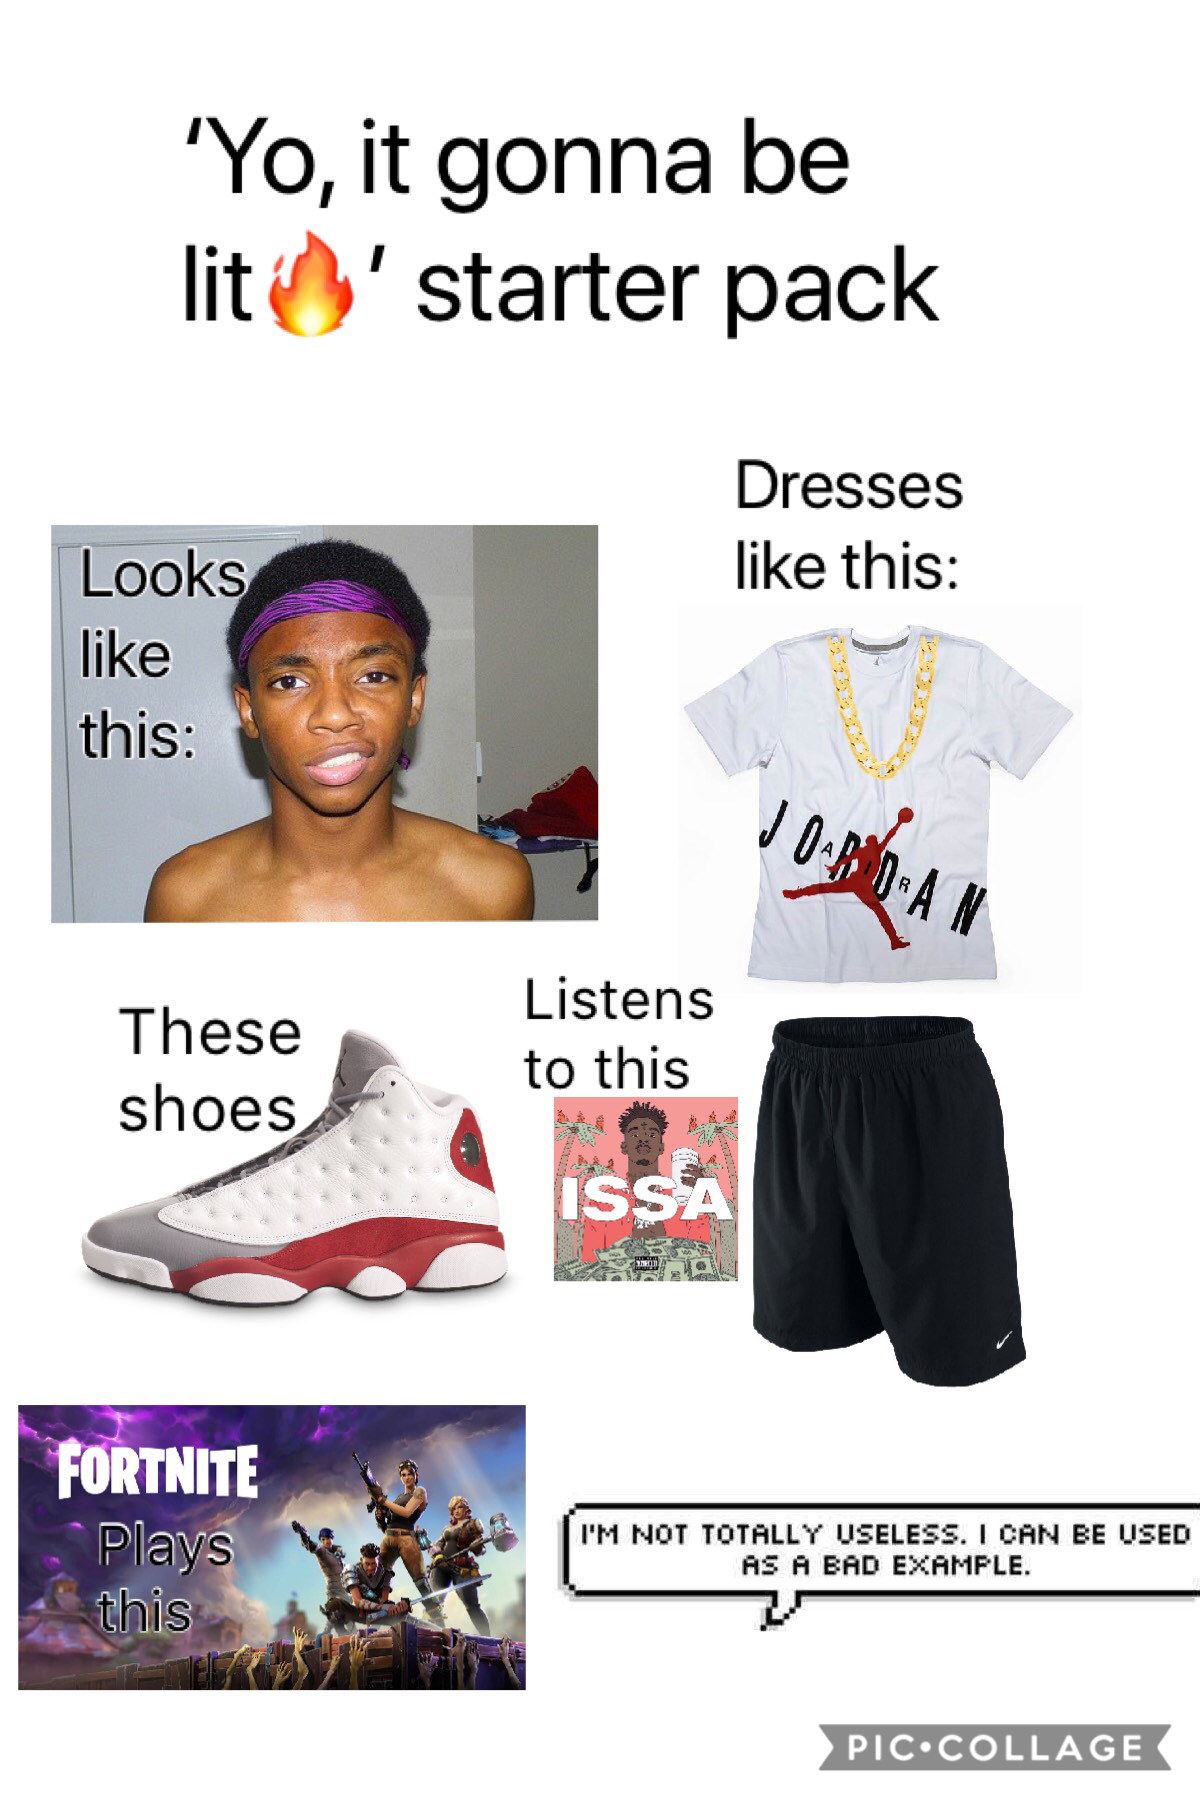 Another starter pack